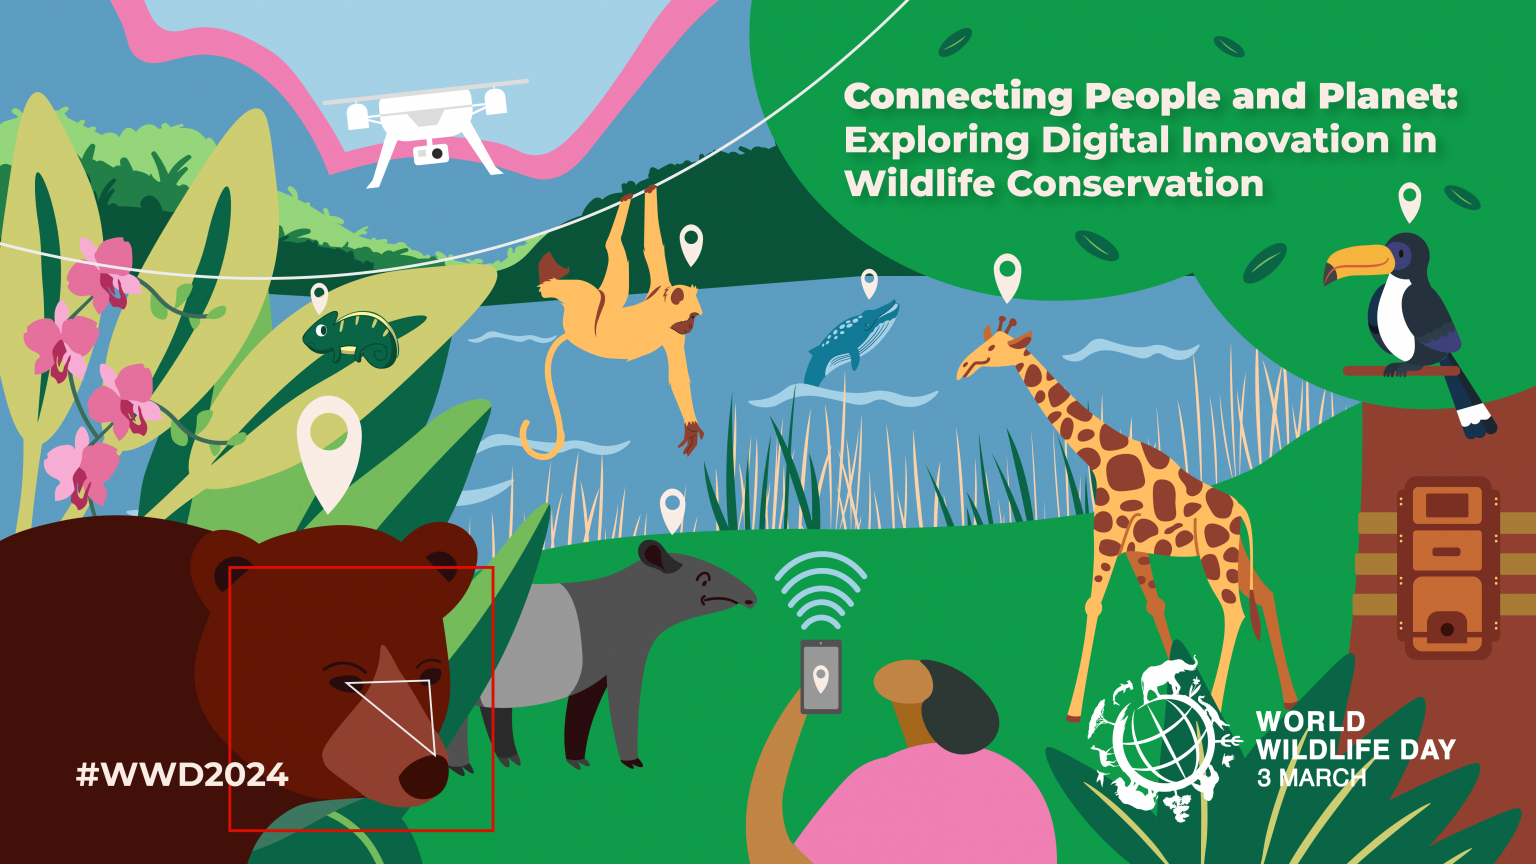 6 World Wildlife Day 2024 Official Poster Contest English Twitter 1536x864 